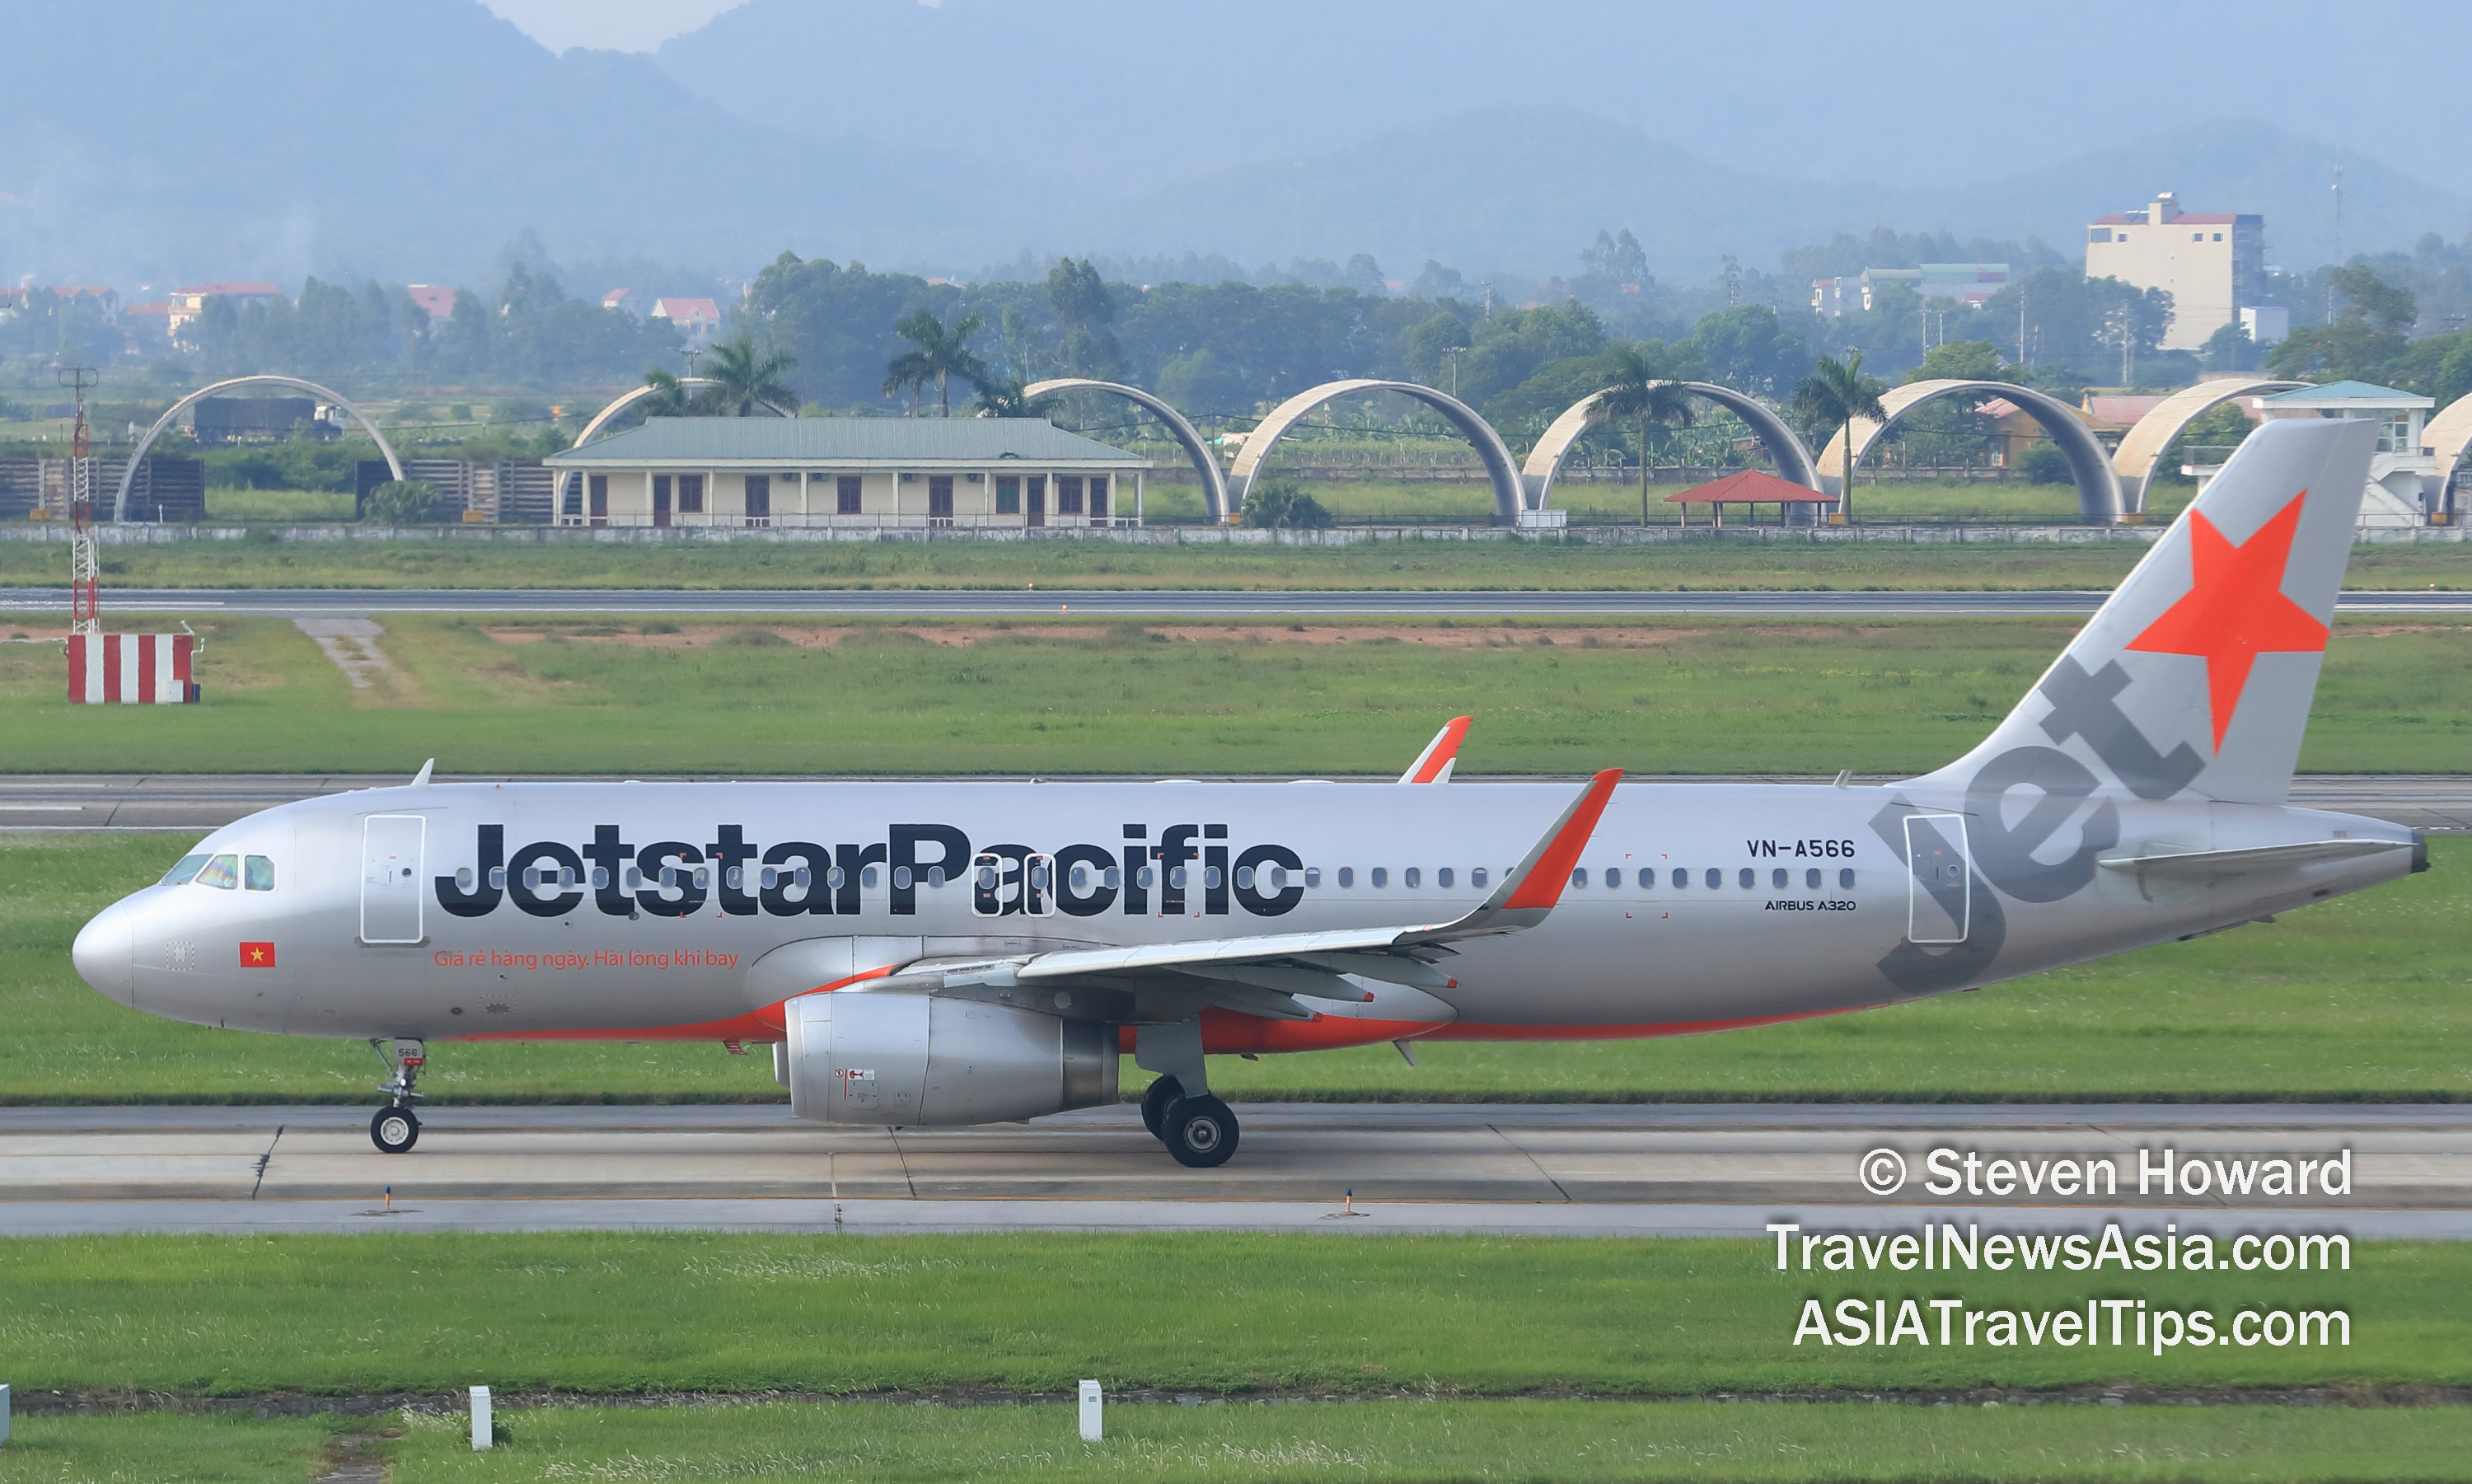 Jetstar Pacific Airbus A320 reg: VN-A566. Picture by Steven Howard of TravelNewsAsia.com Click to enlarge.